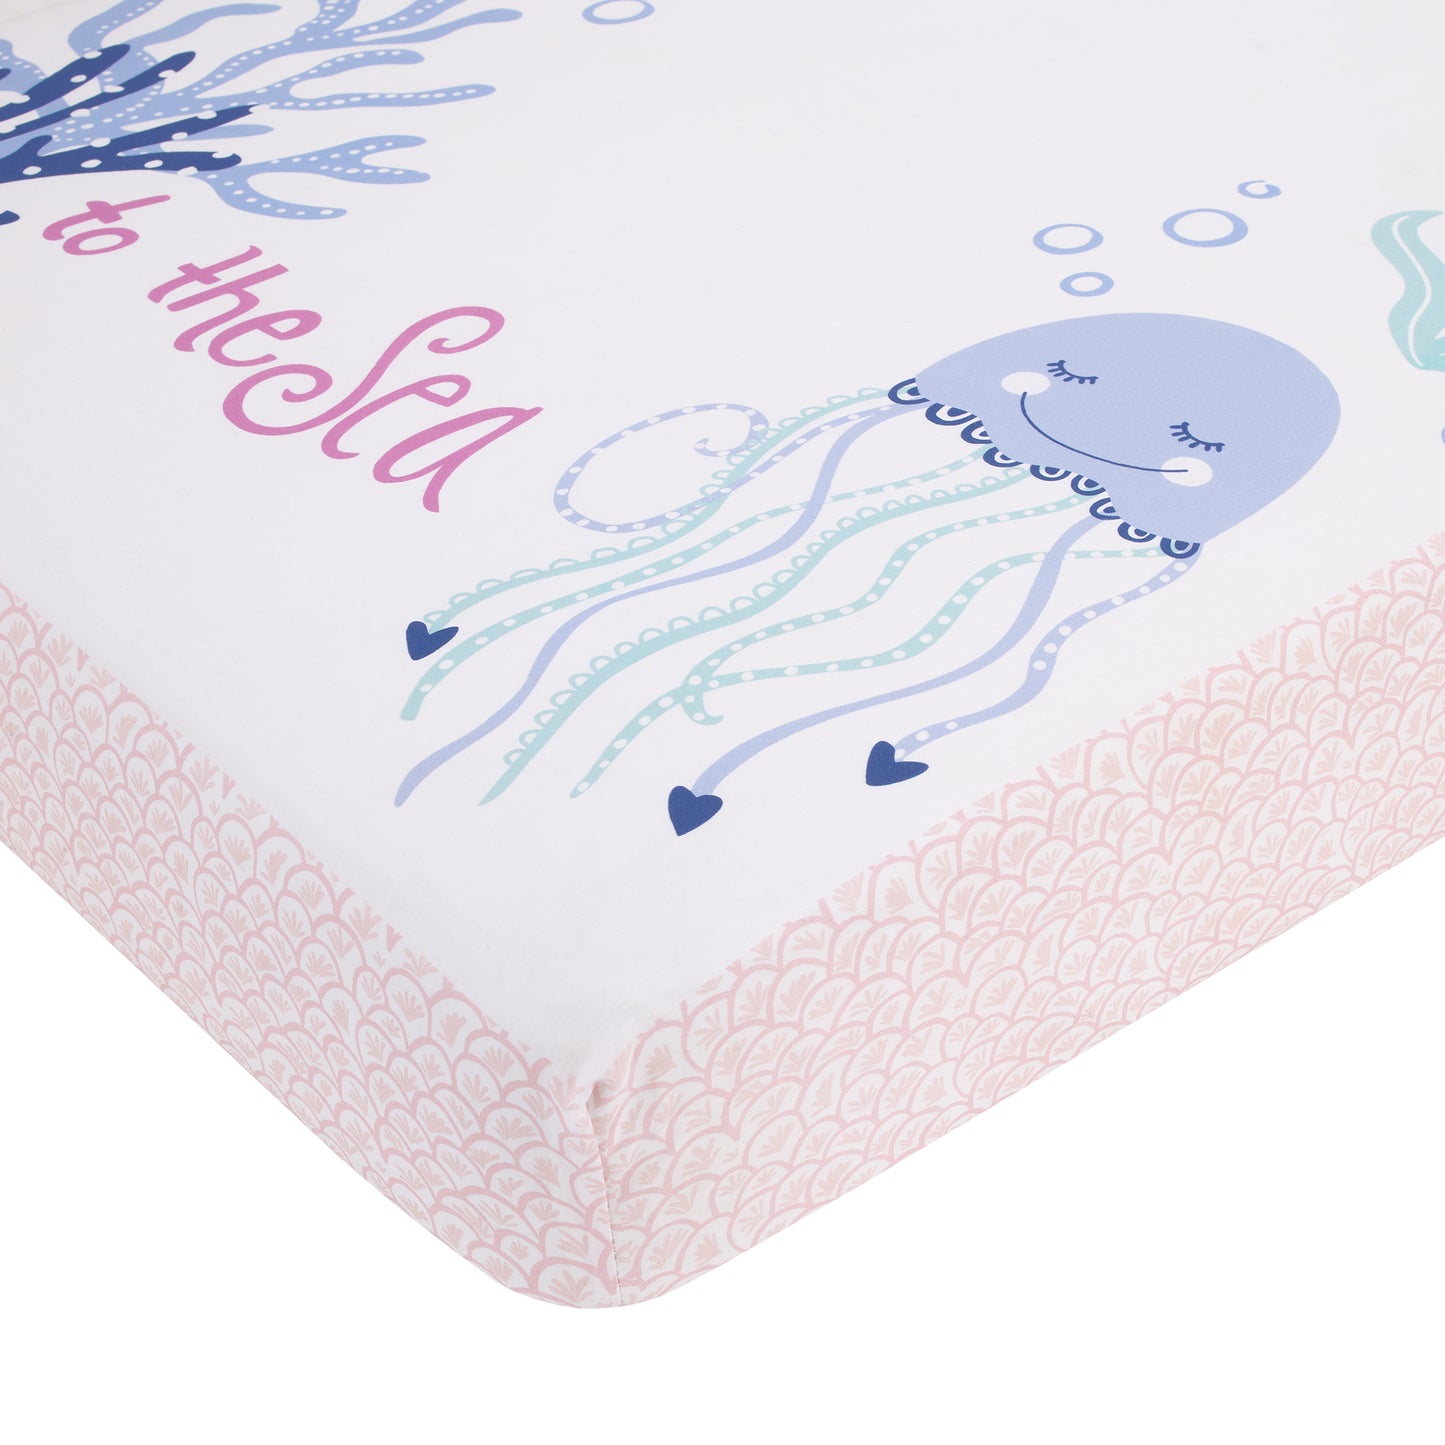 NoJo Mermaid Lagoon Pink, Blue, and White "Come with me to the Sea" 100% Cotton Photo Op Fitted Crib Sheet